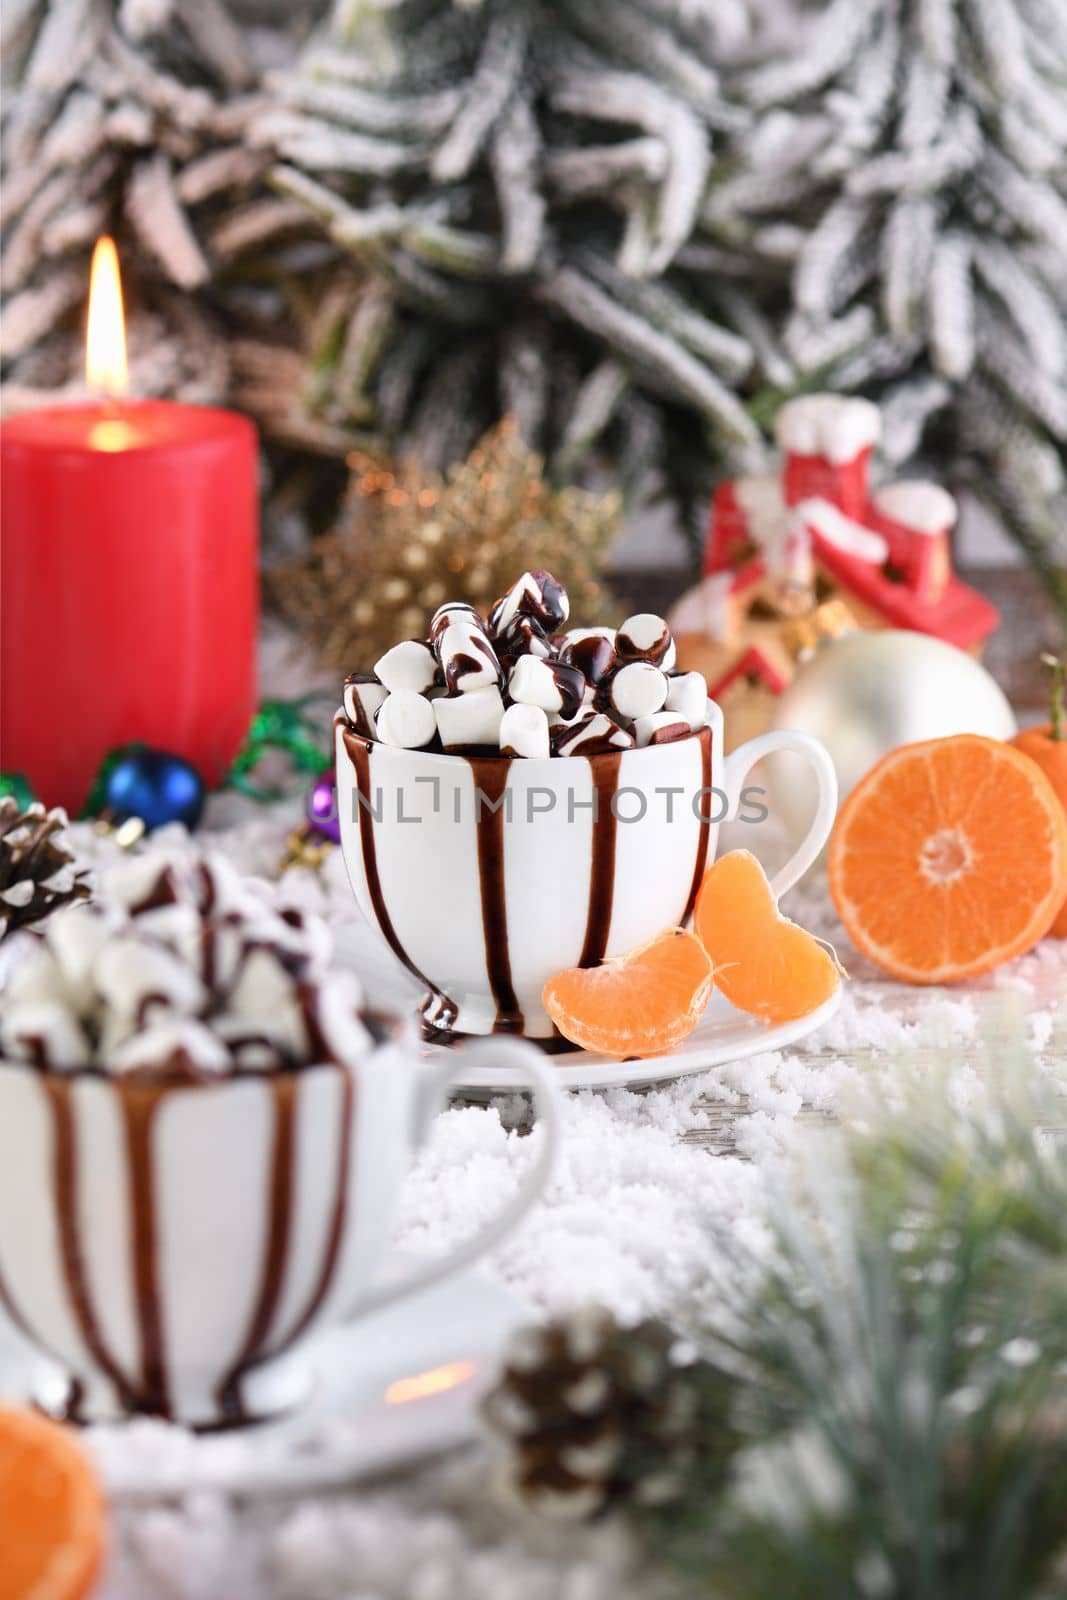 Hot chocolate with marshmallows in a white ceramic mug, with tangerines on a snowy table. The concept of a cozy holiday for Christmas and New Year.